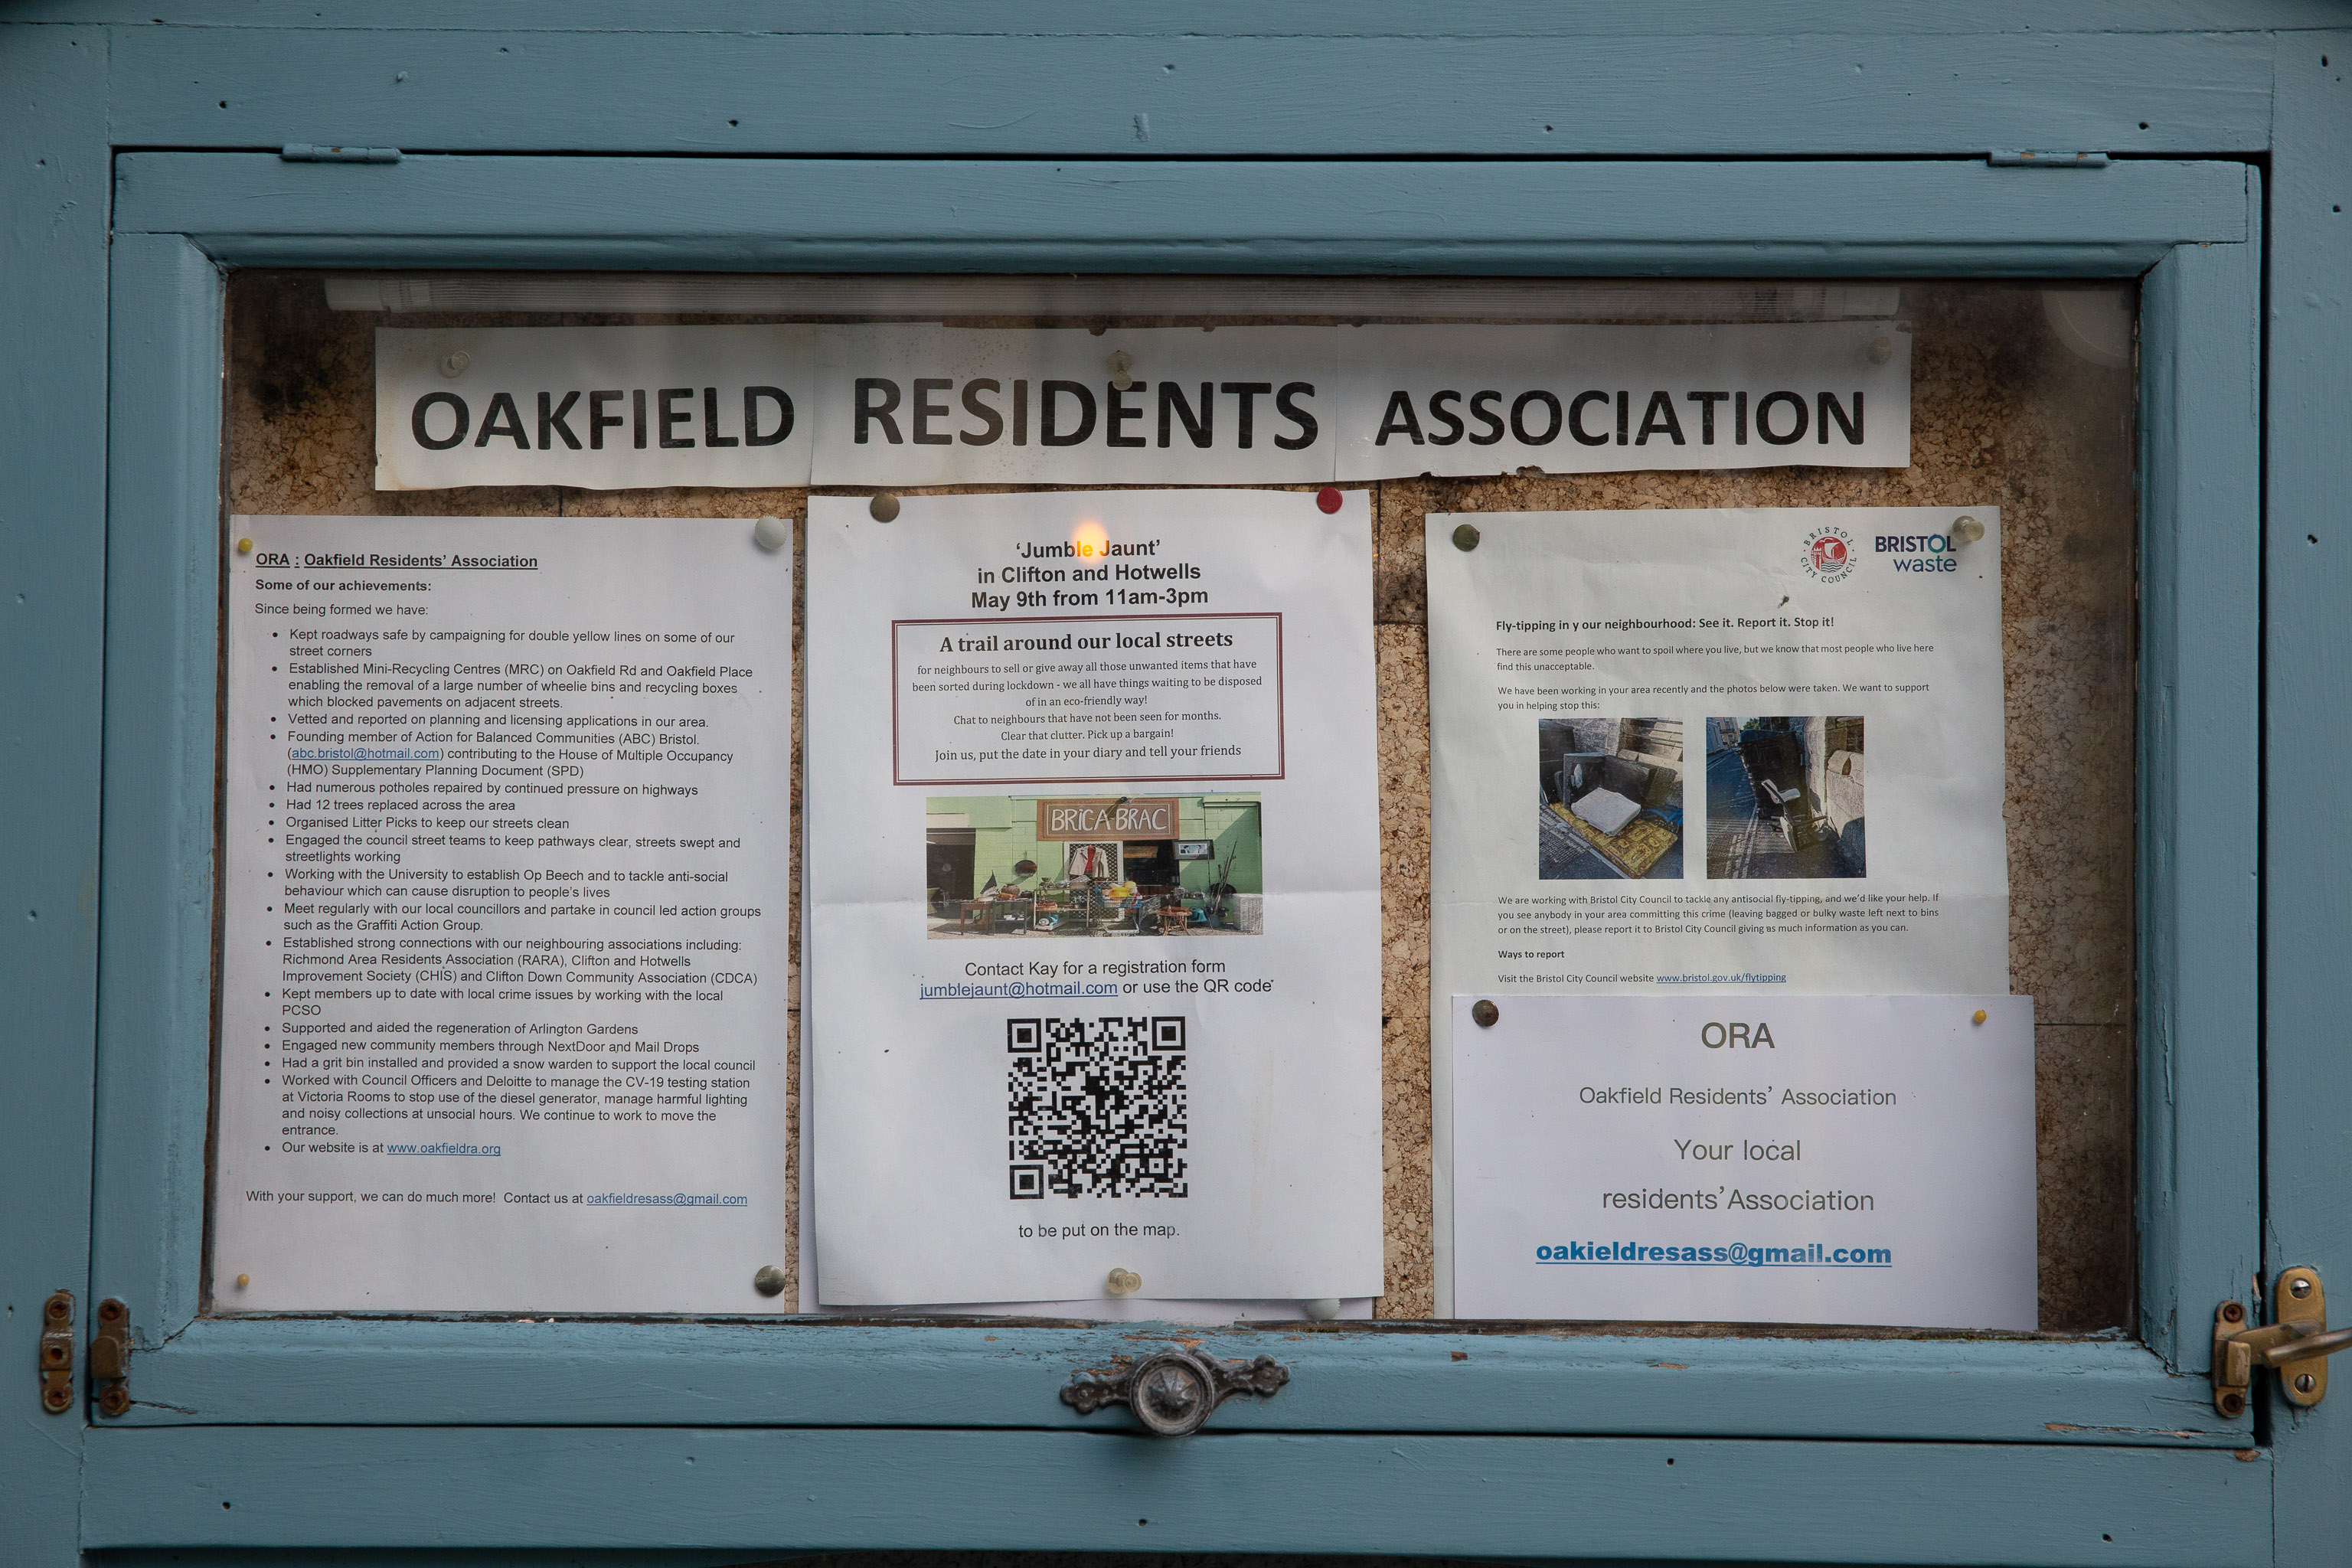 RESIDENTS
A "Jumble Jaunt"—just the kind of thing you want to see on a community notice board.
